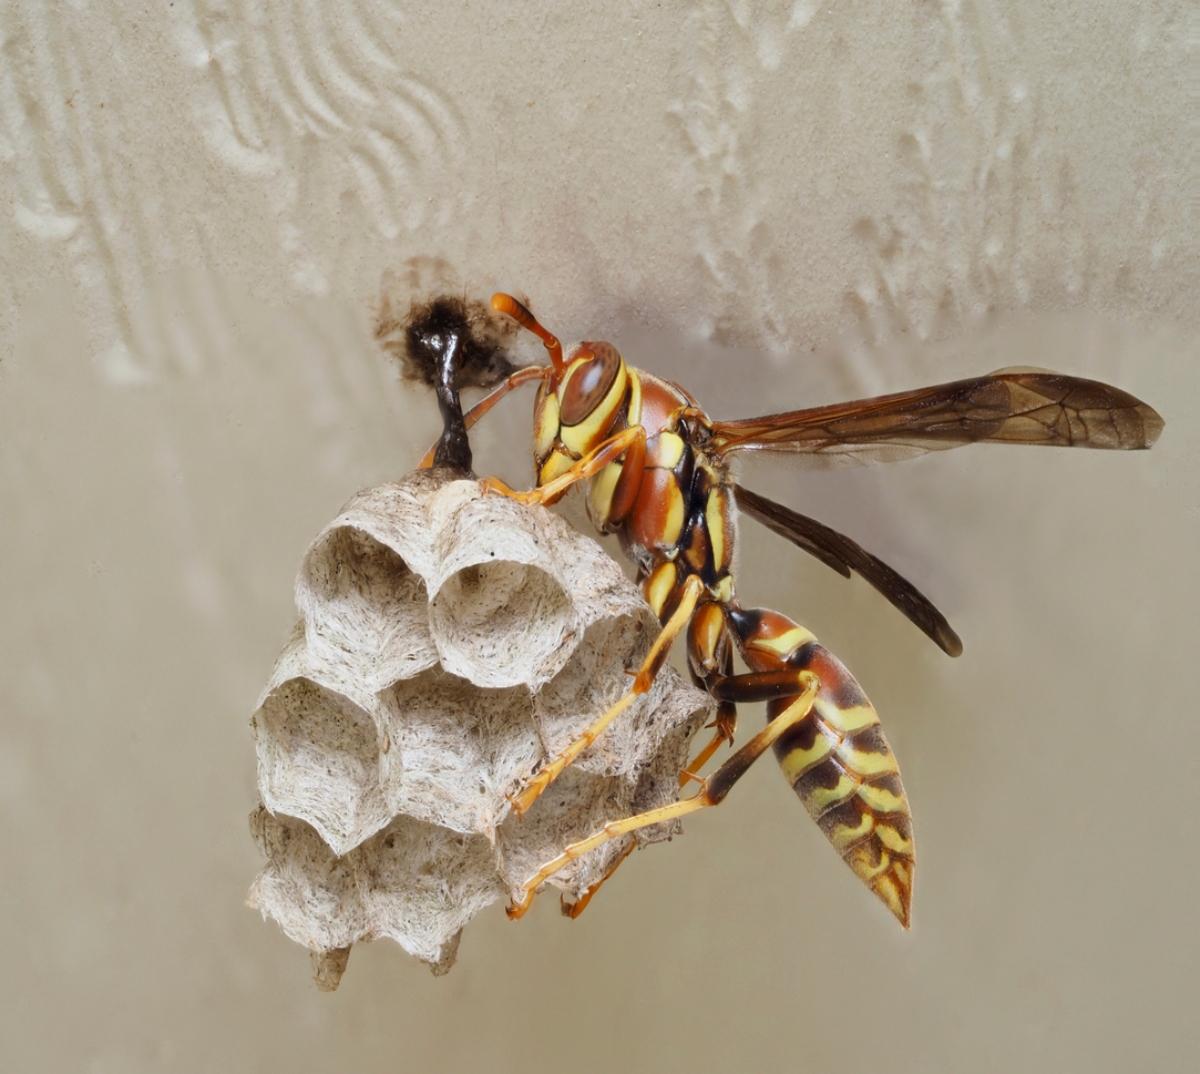 https://media.greenmatters.com/brand-img/mH6kLUKPW/0x0/what-does-a-wasp-nest-look-like-1-1688398632819.jpg